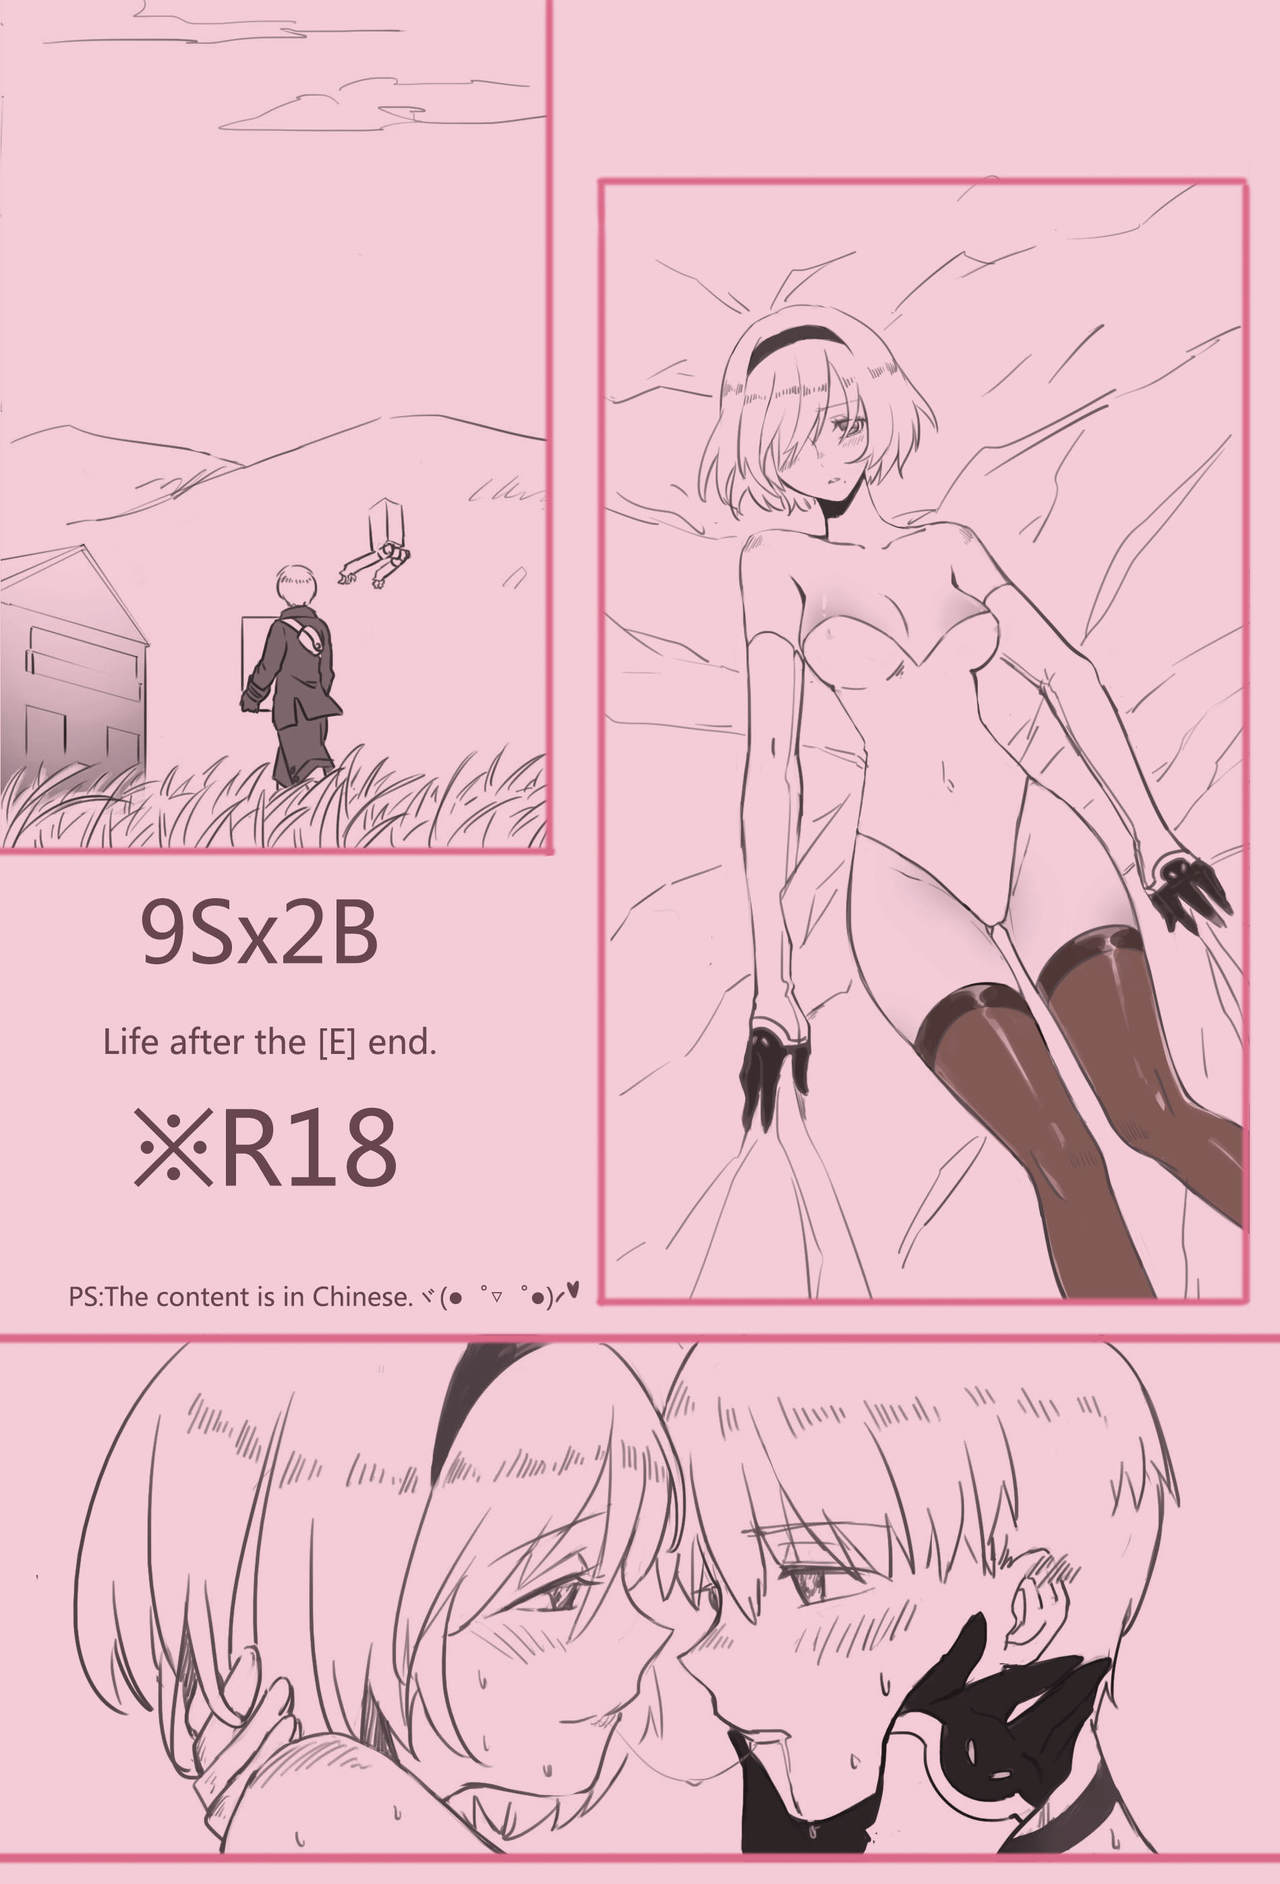 [WS] 9Sx2B - Life after the [E] end. (NieR:Automata) [Chinese] [WS] 9Sx2B - Life after the [E] end. (ニーア オートマタ) [中国語]